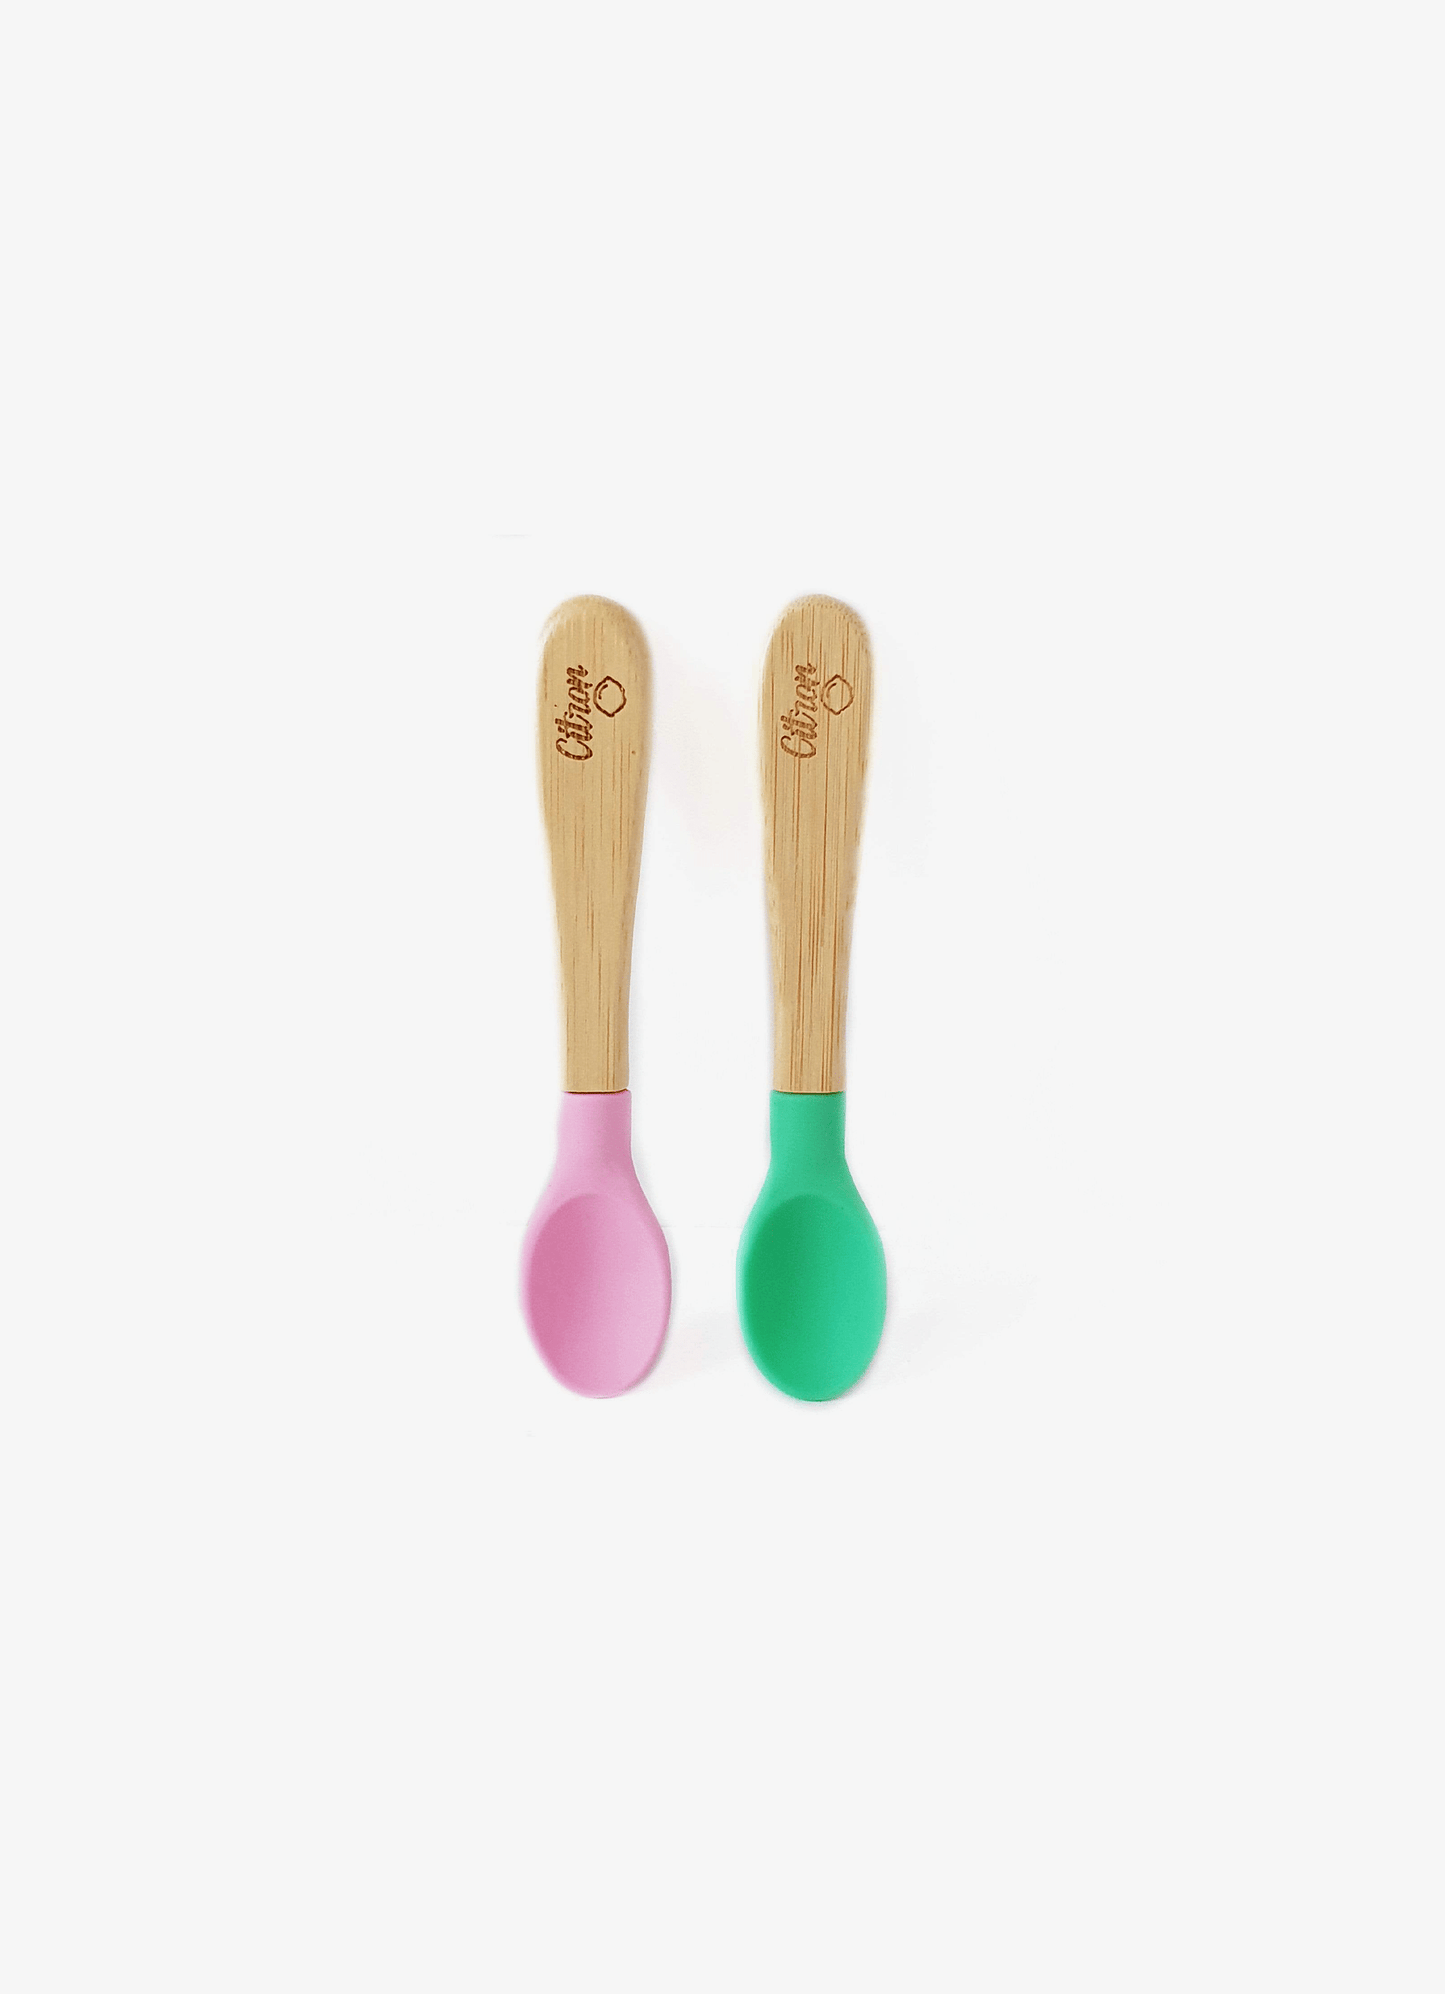 Short handled bamboo spoons - set of 2 - Pink and Green